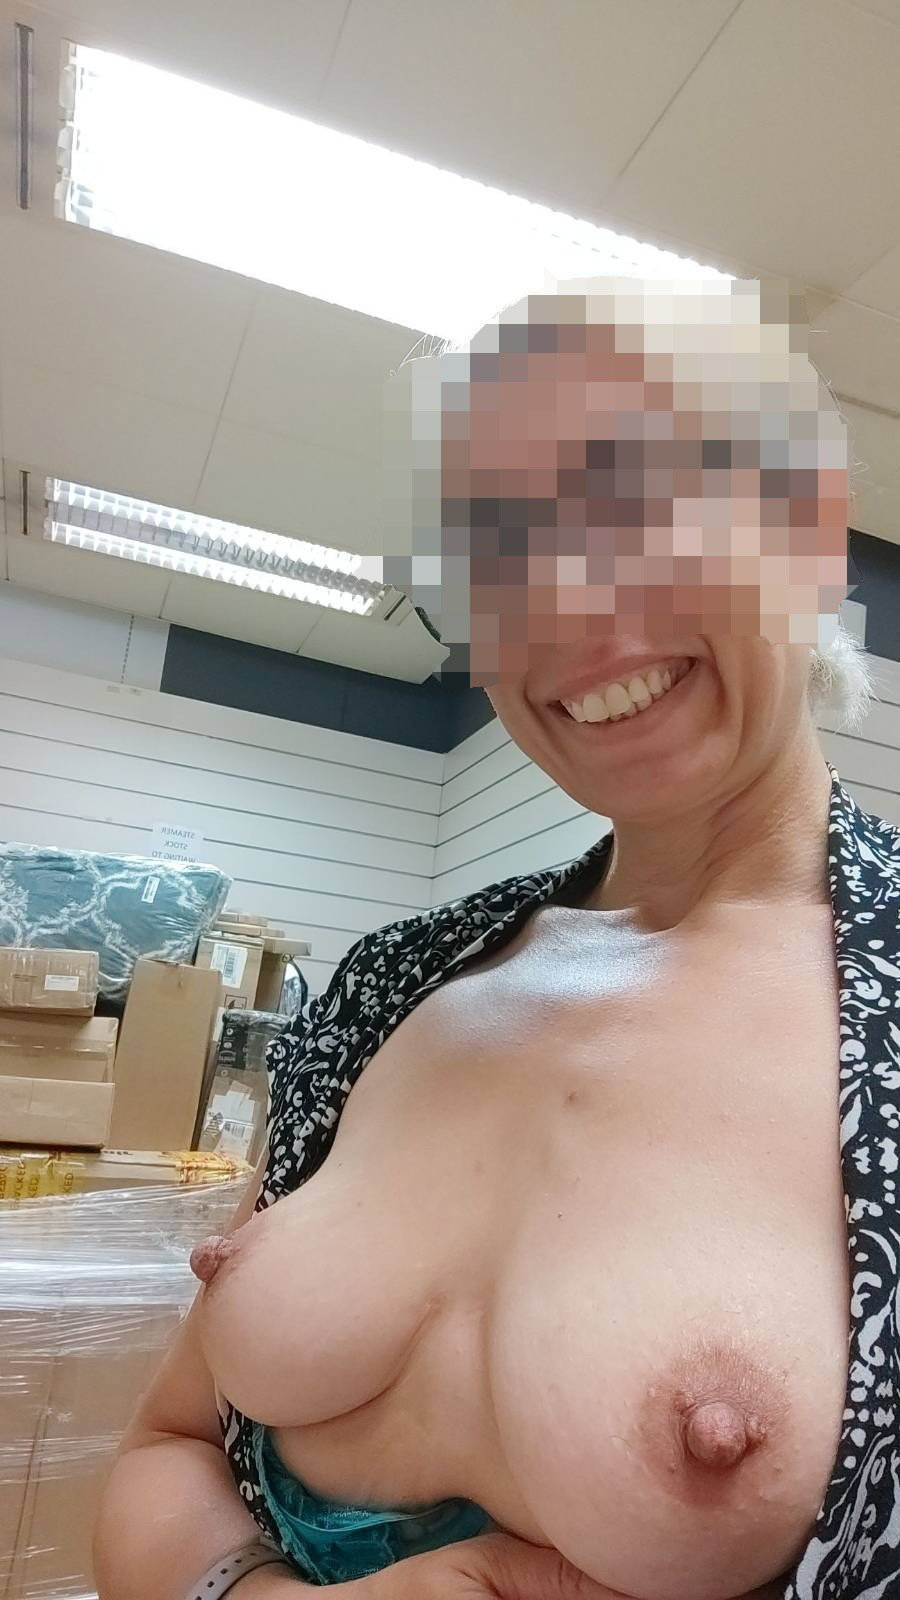 Photo by Joker_and_Harley with the username @Joker-and-Harley, who is a verified user,  December 12, 2022 at 2:48 PM. The post is about the topic Naked Women At Work and the text says 'Share,Like,Flame and comment... Cock/Cumtribute very welcome ... plenty of choice on our gallery....and tag to let us know of course!!'